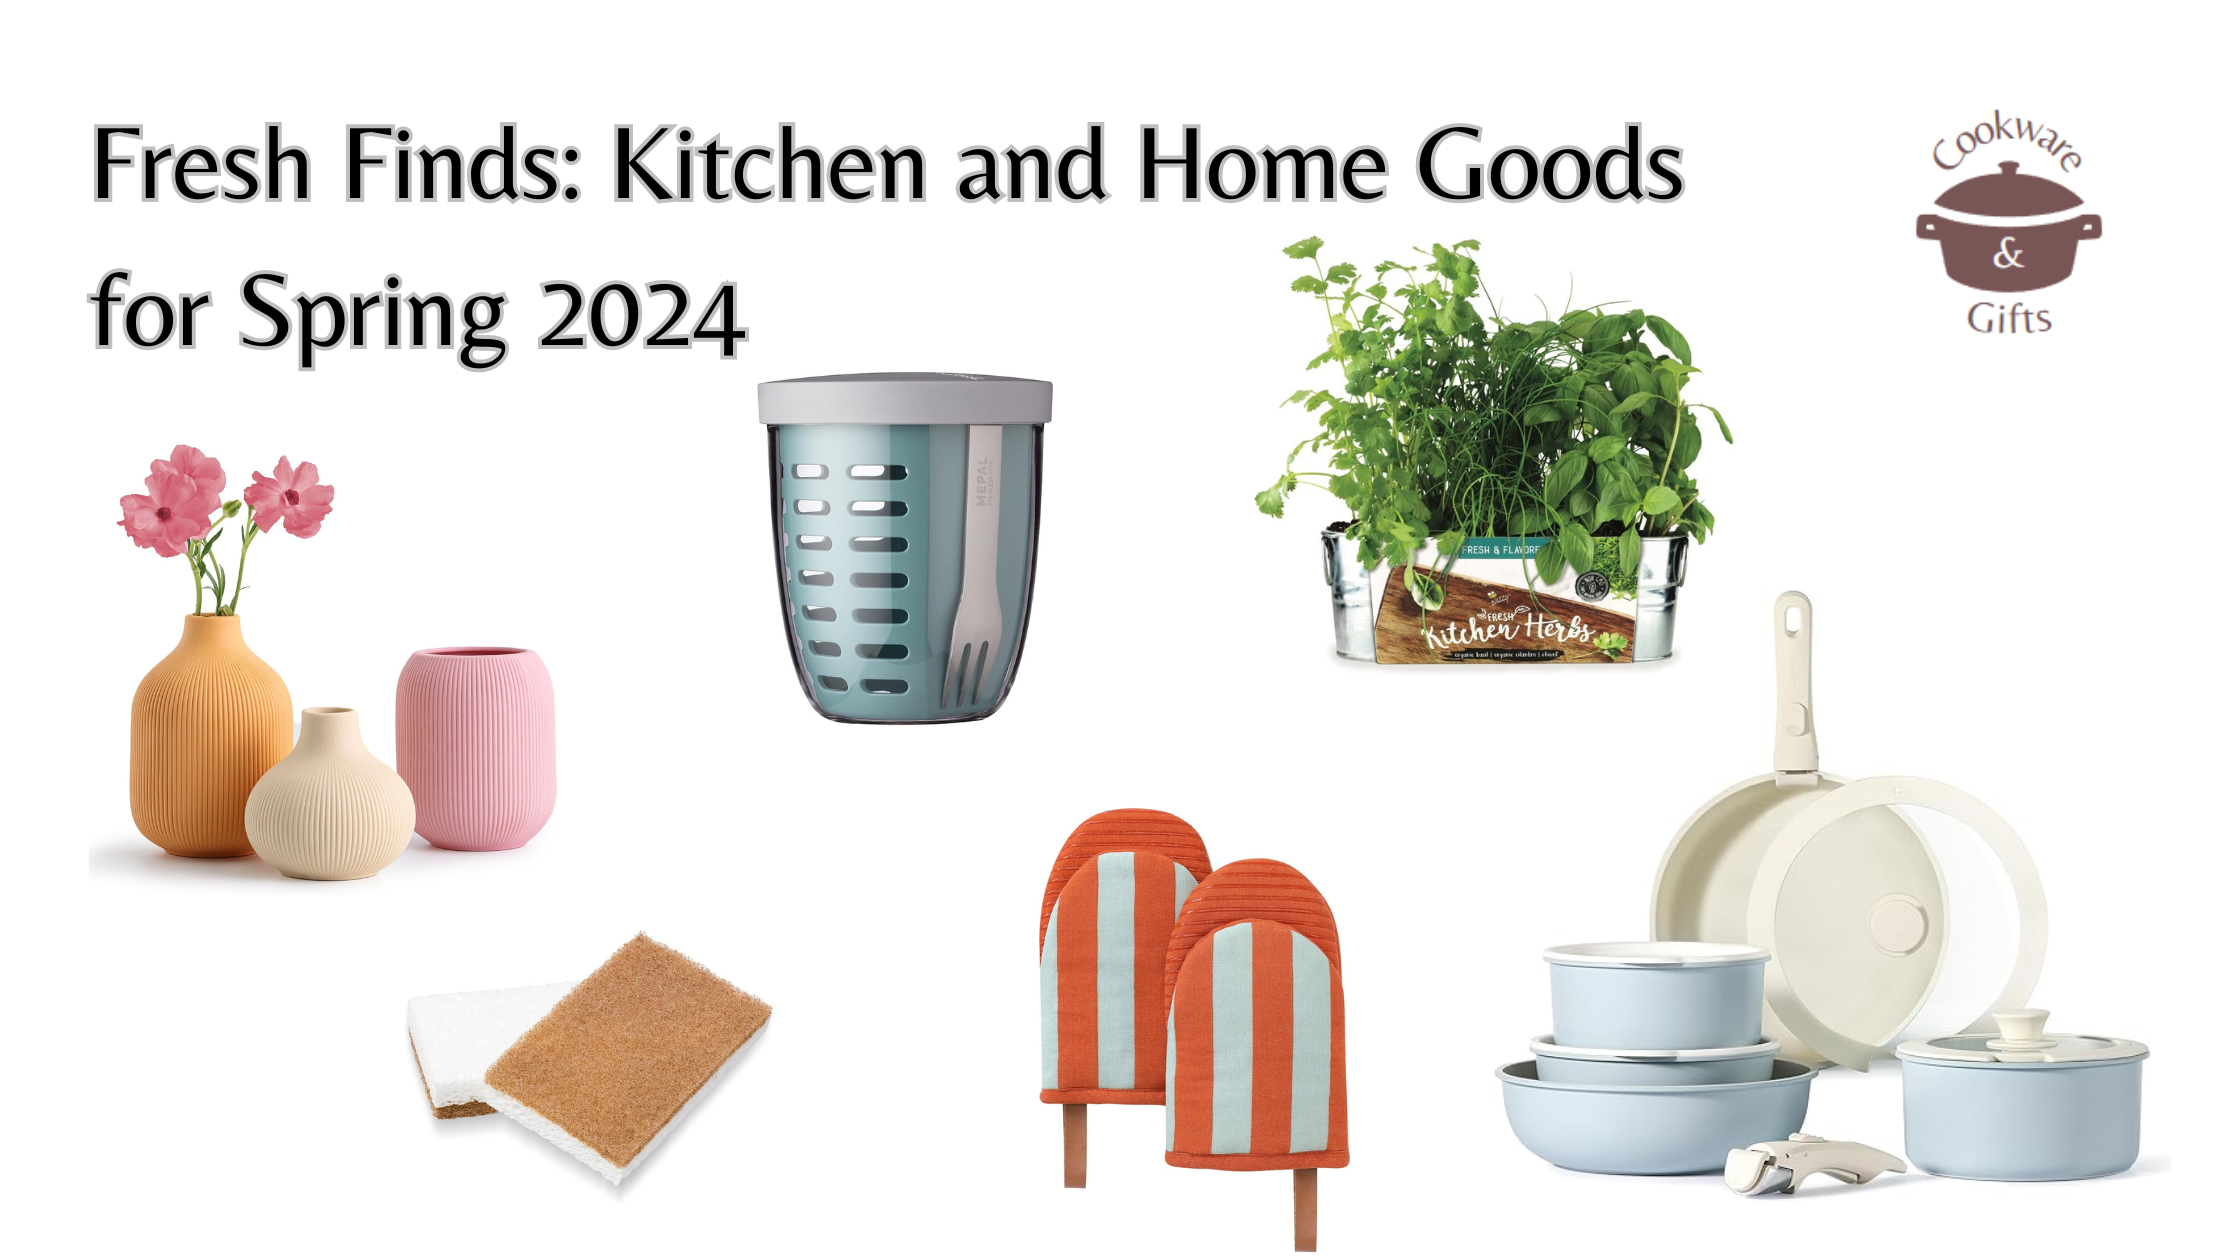 Fresh Finds: New Kitchen and Home Goods for Spring 2024